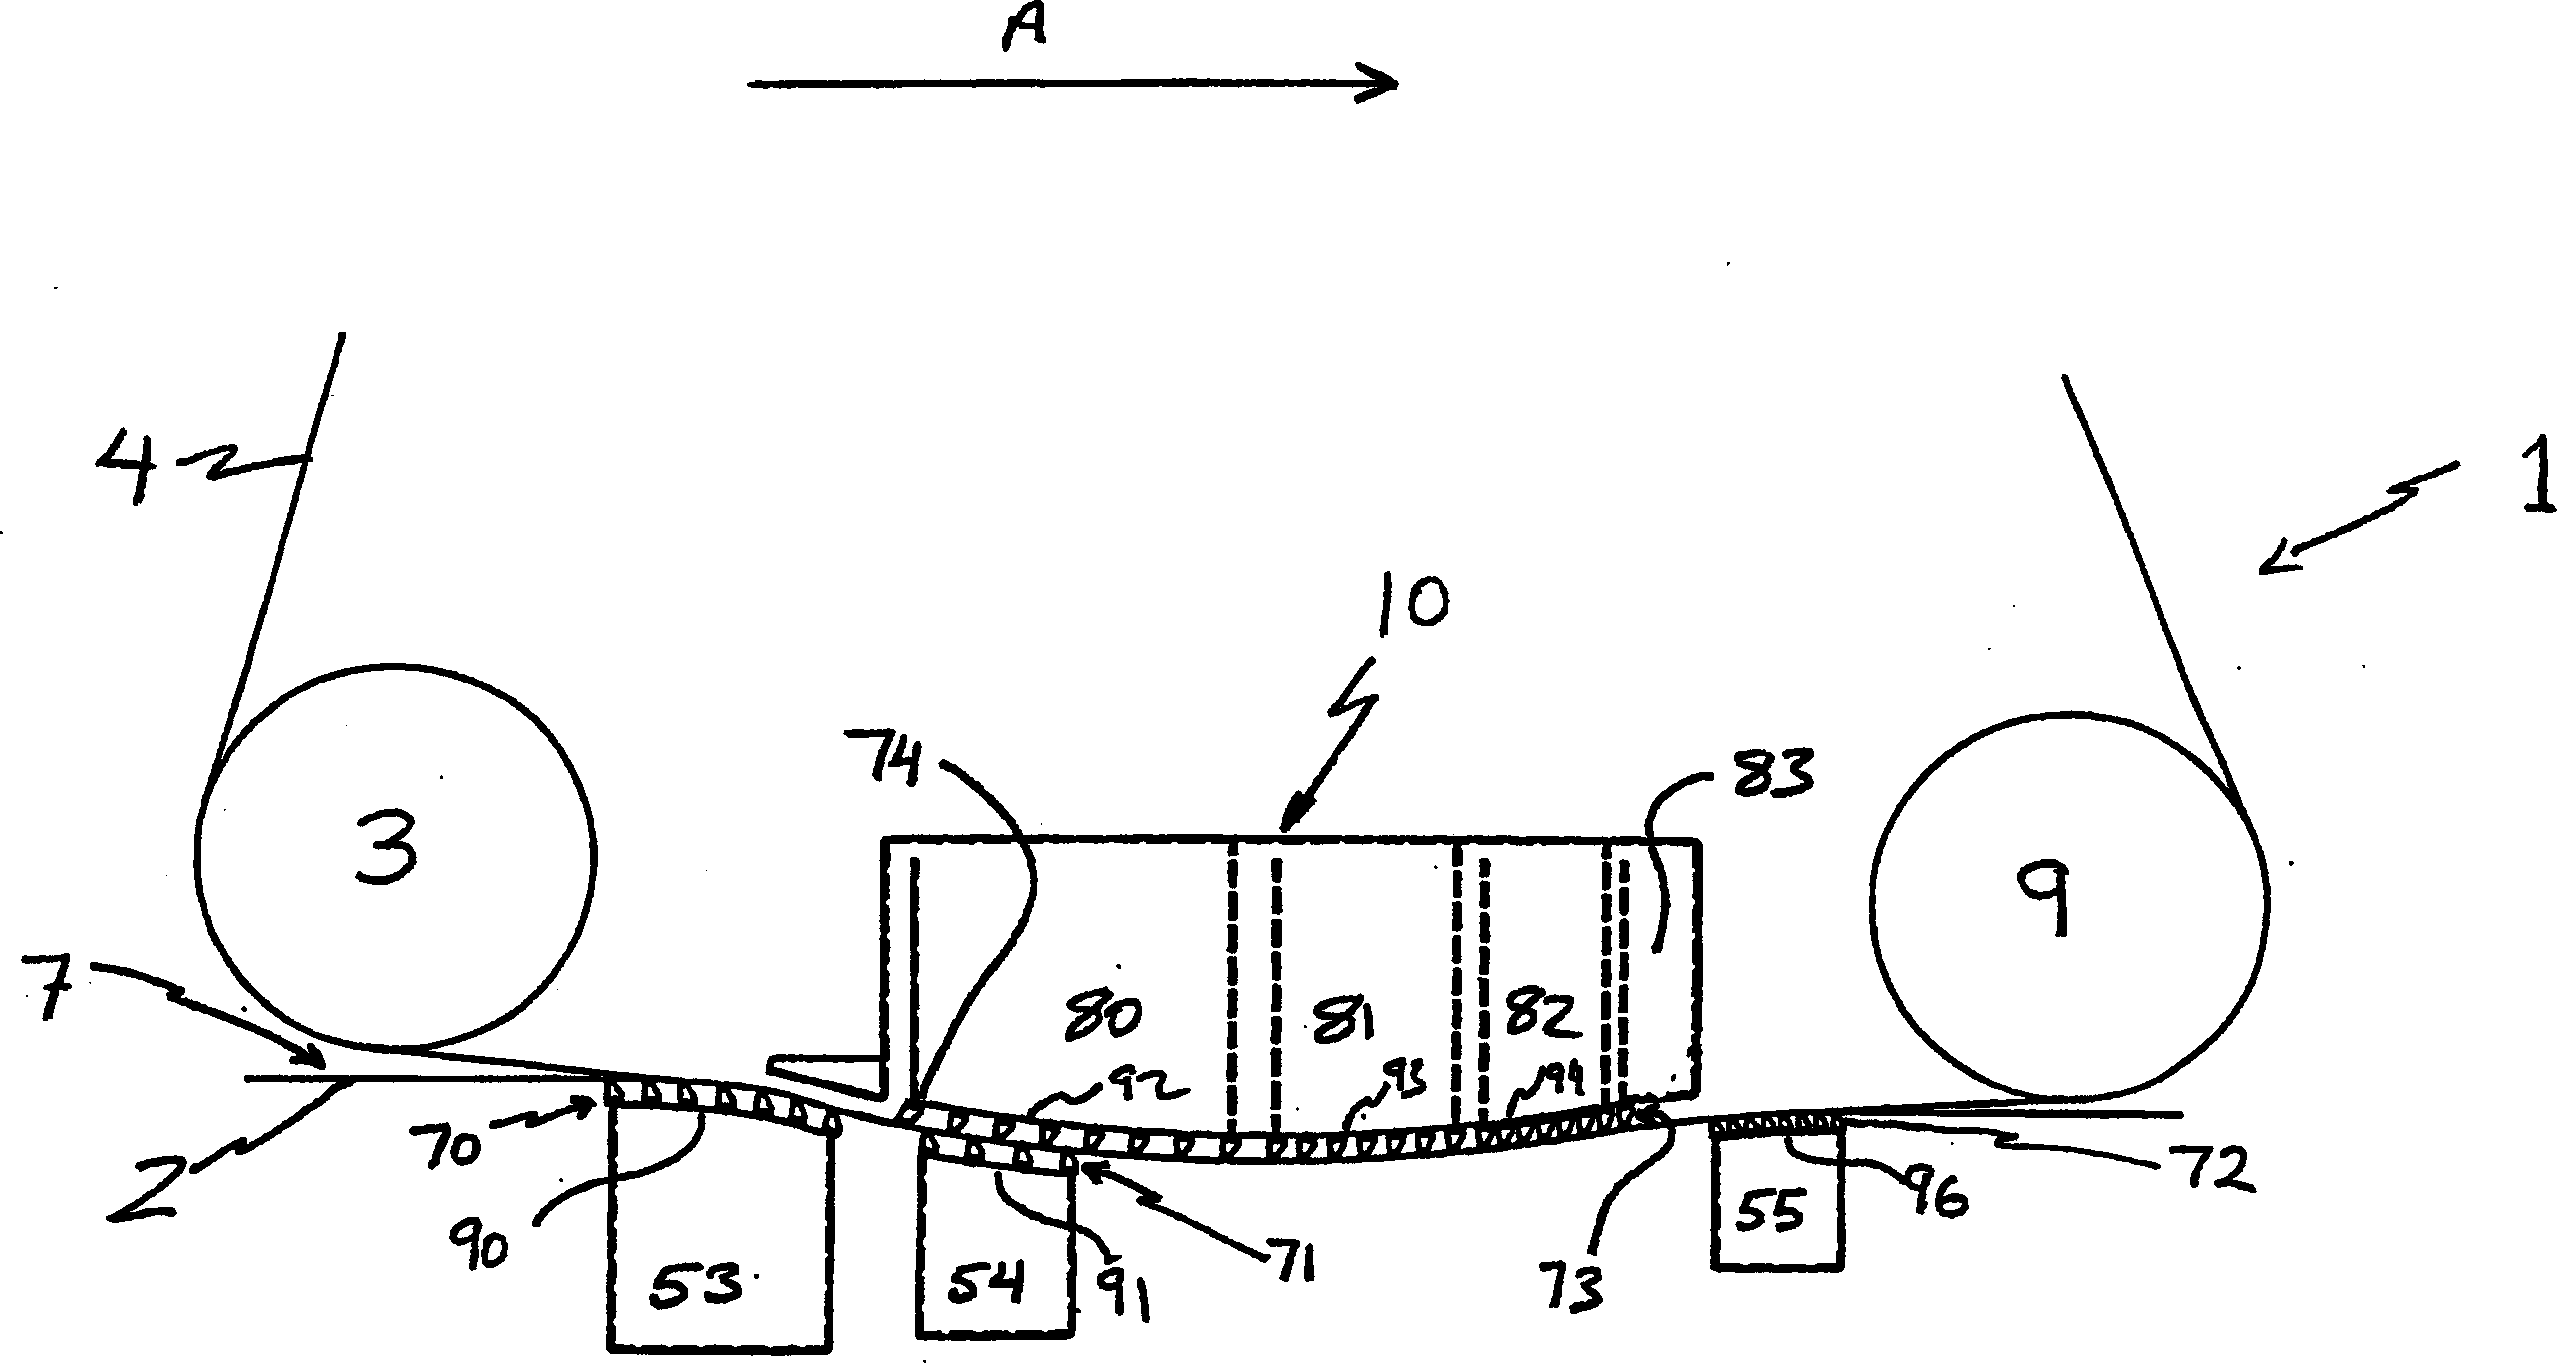 Hybrid type forming section for a paper making machine